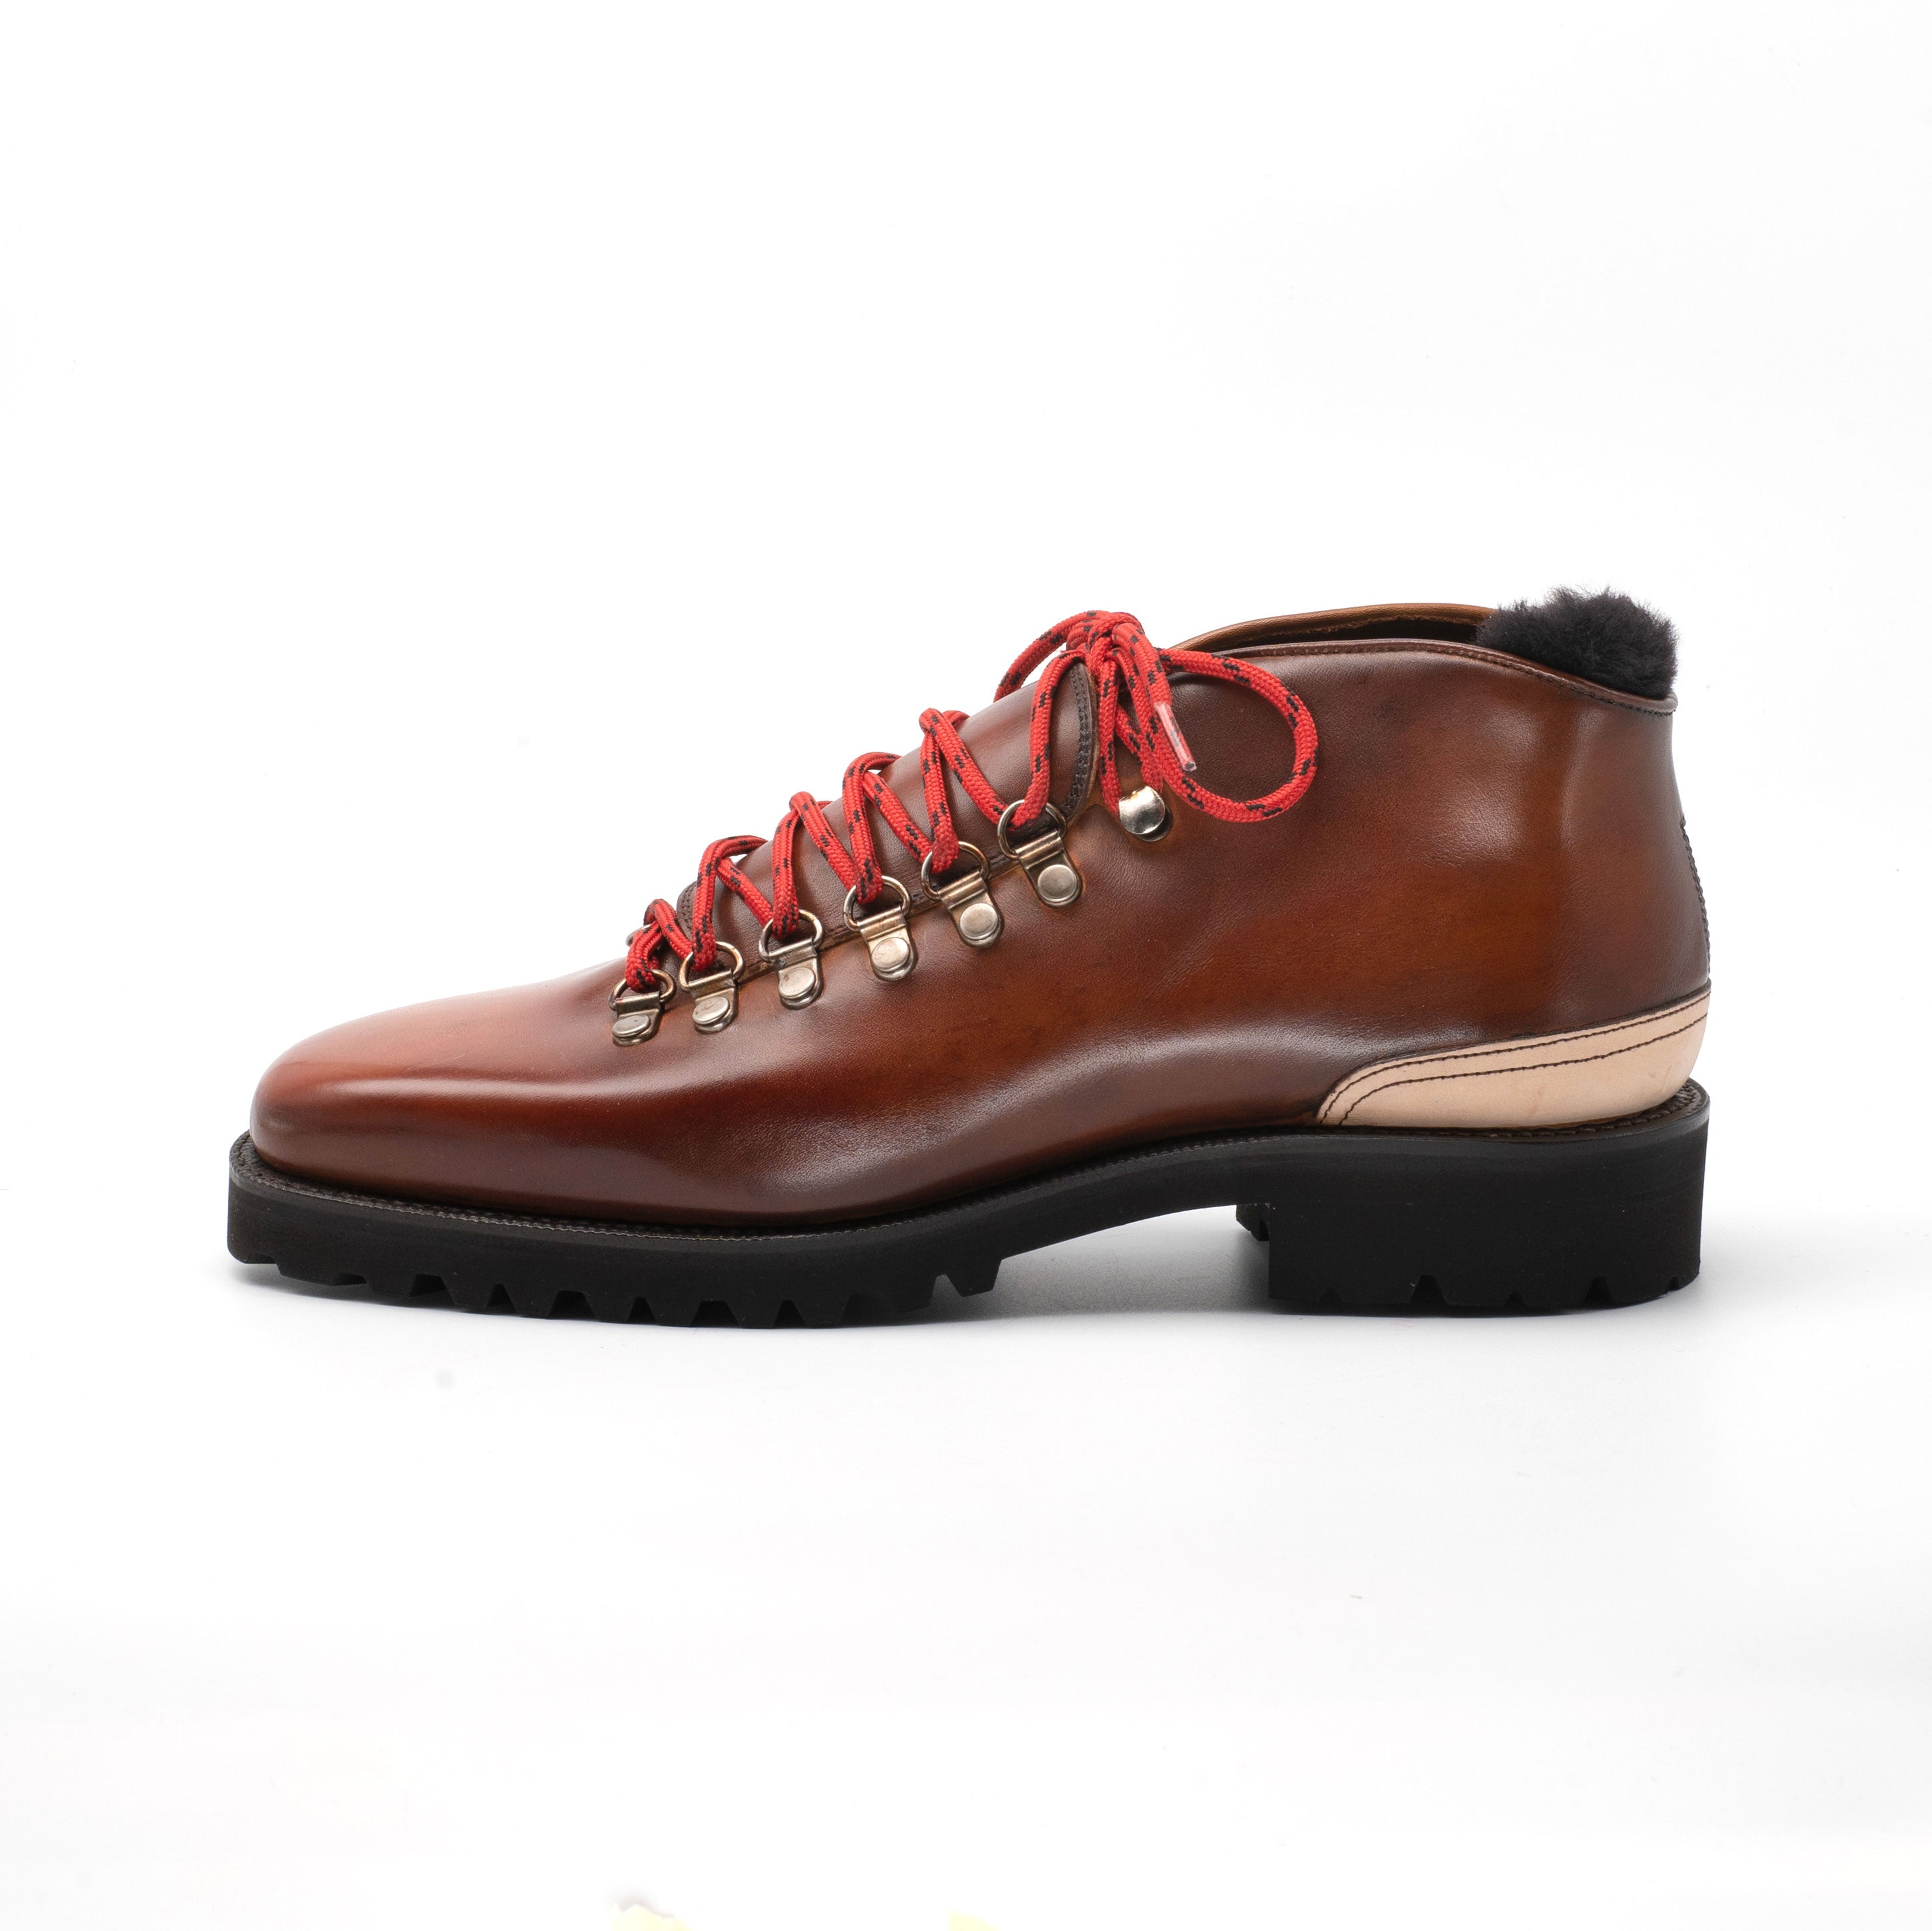 Borcego Mountain Boot by Norman Vilalta Men's Boots in Barcelona, Spain